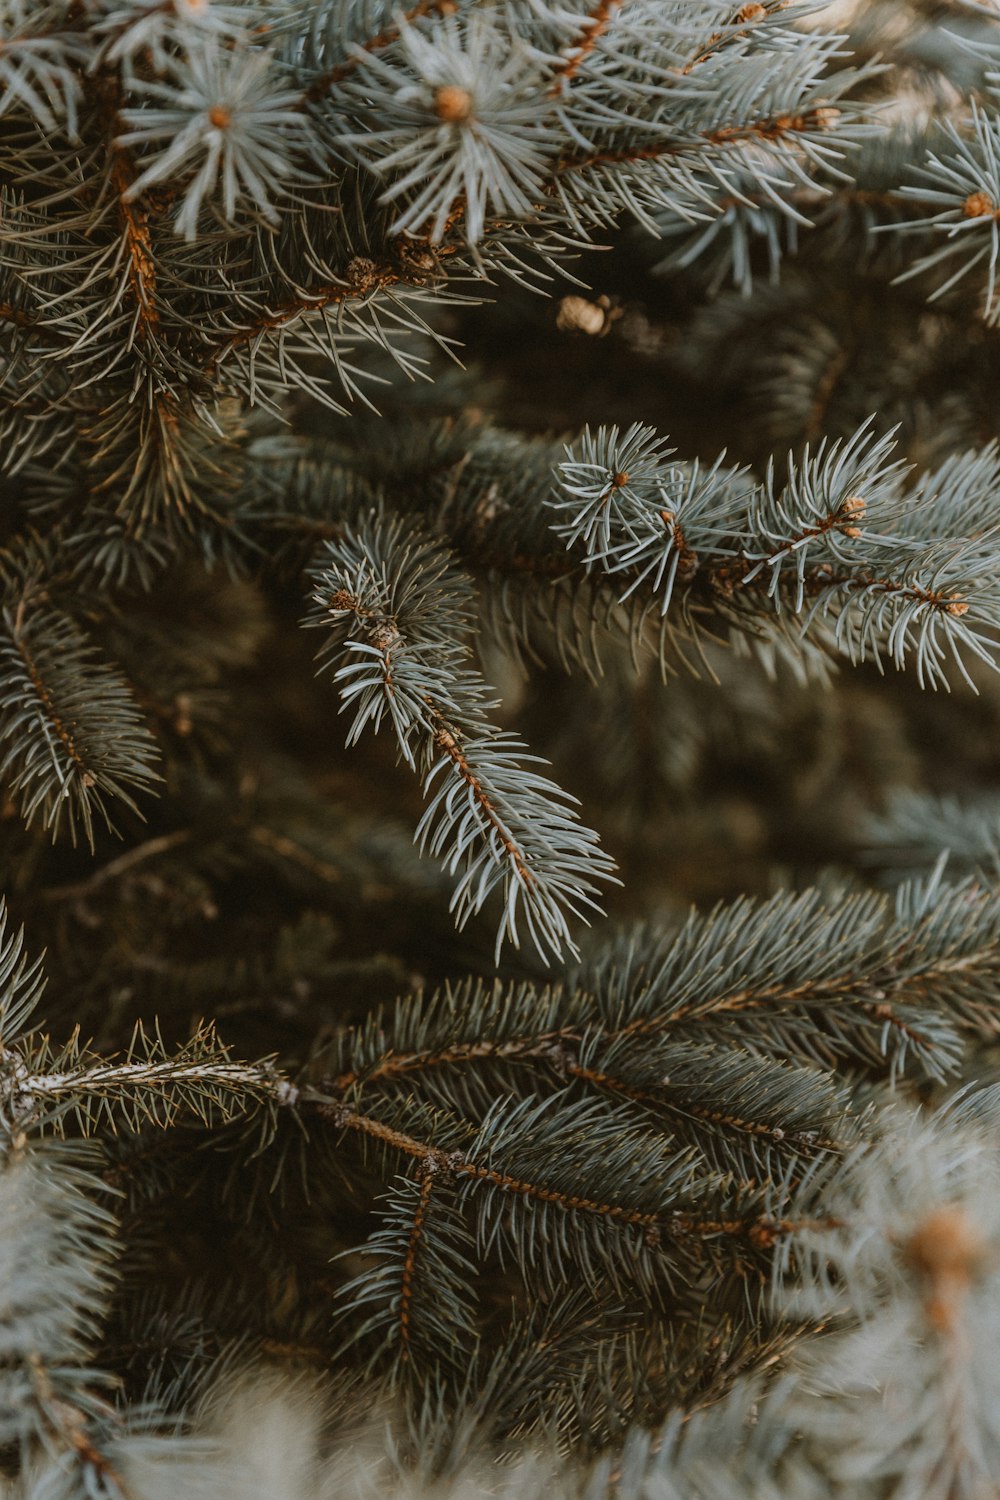 a close up of a pine tree with needles